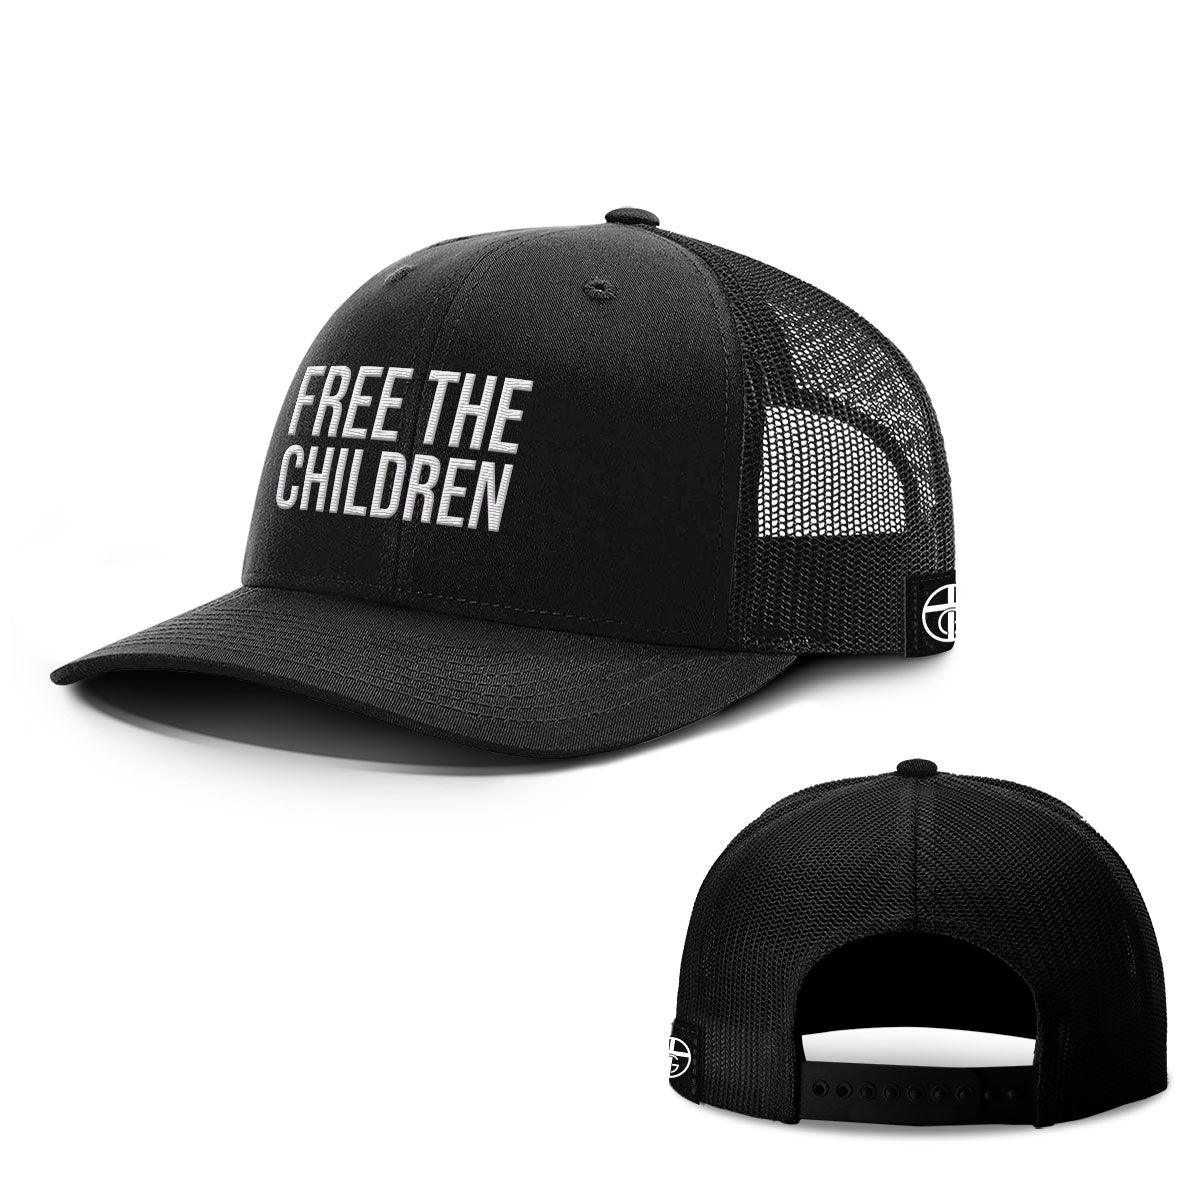 Free The Children Hats - Our True God